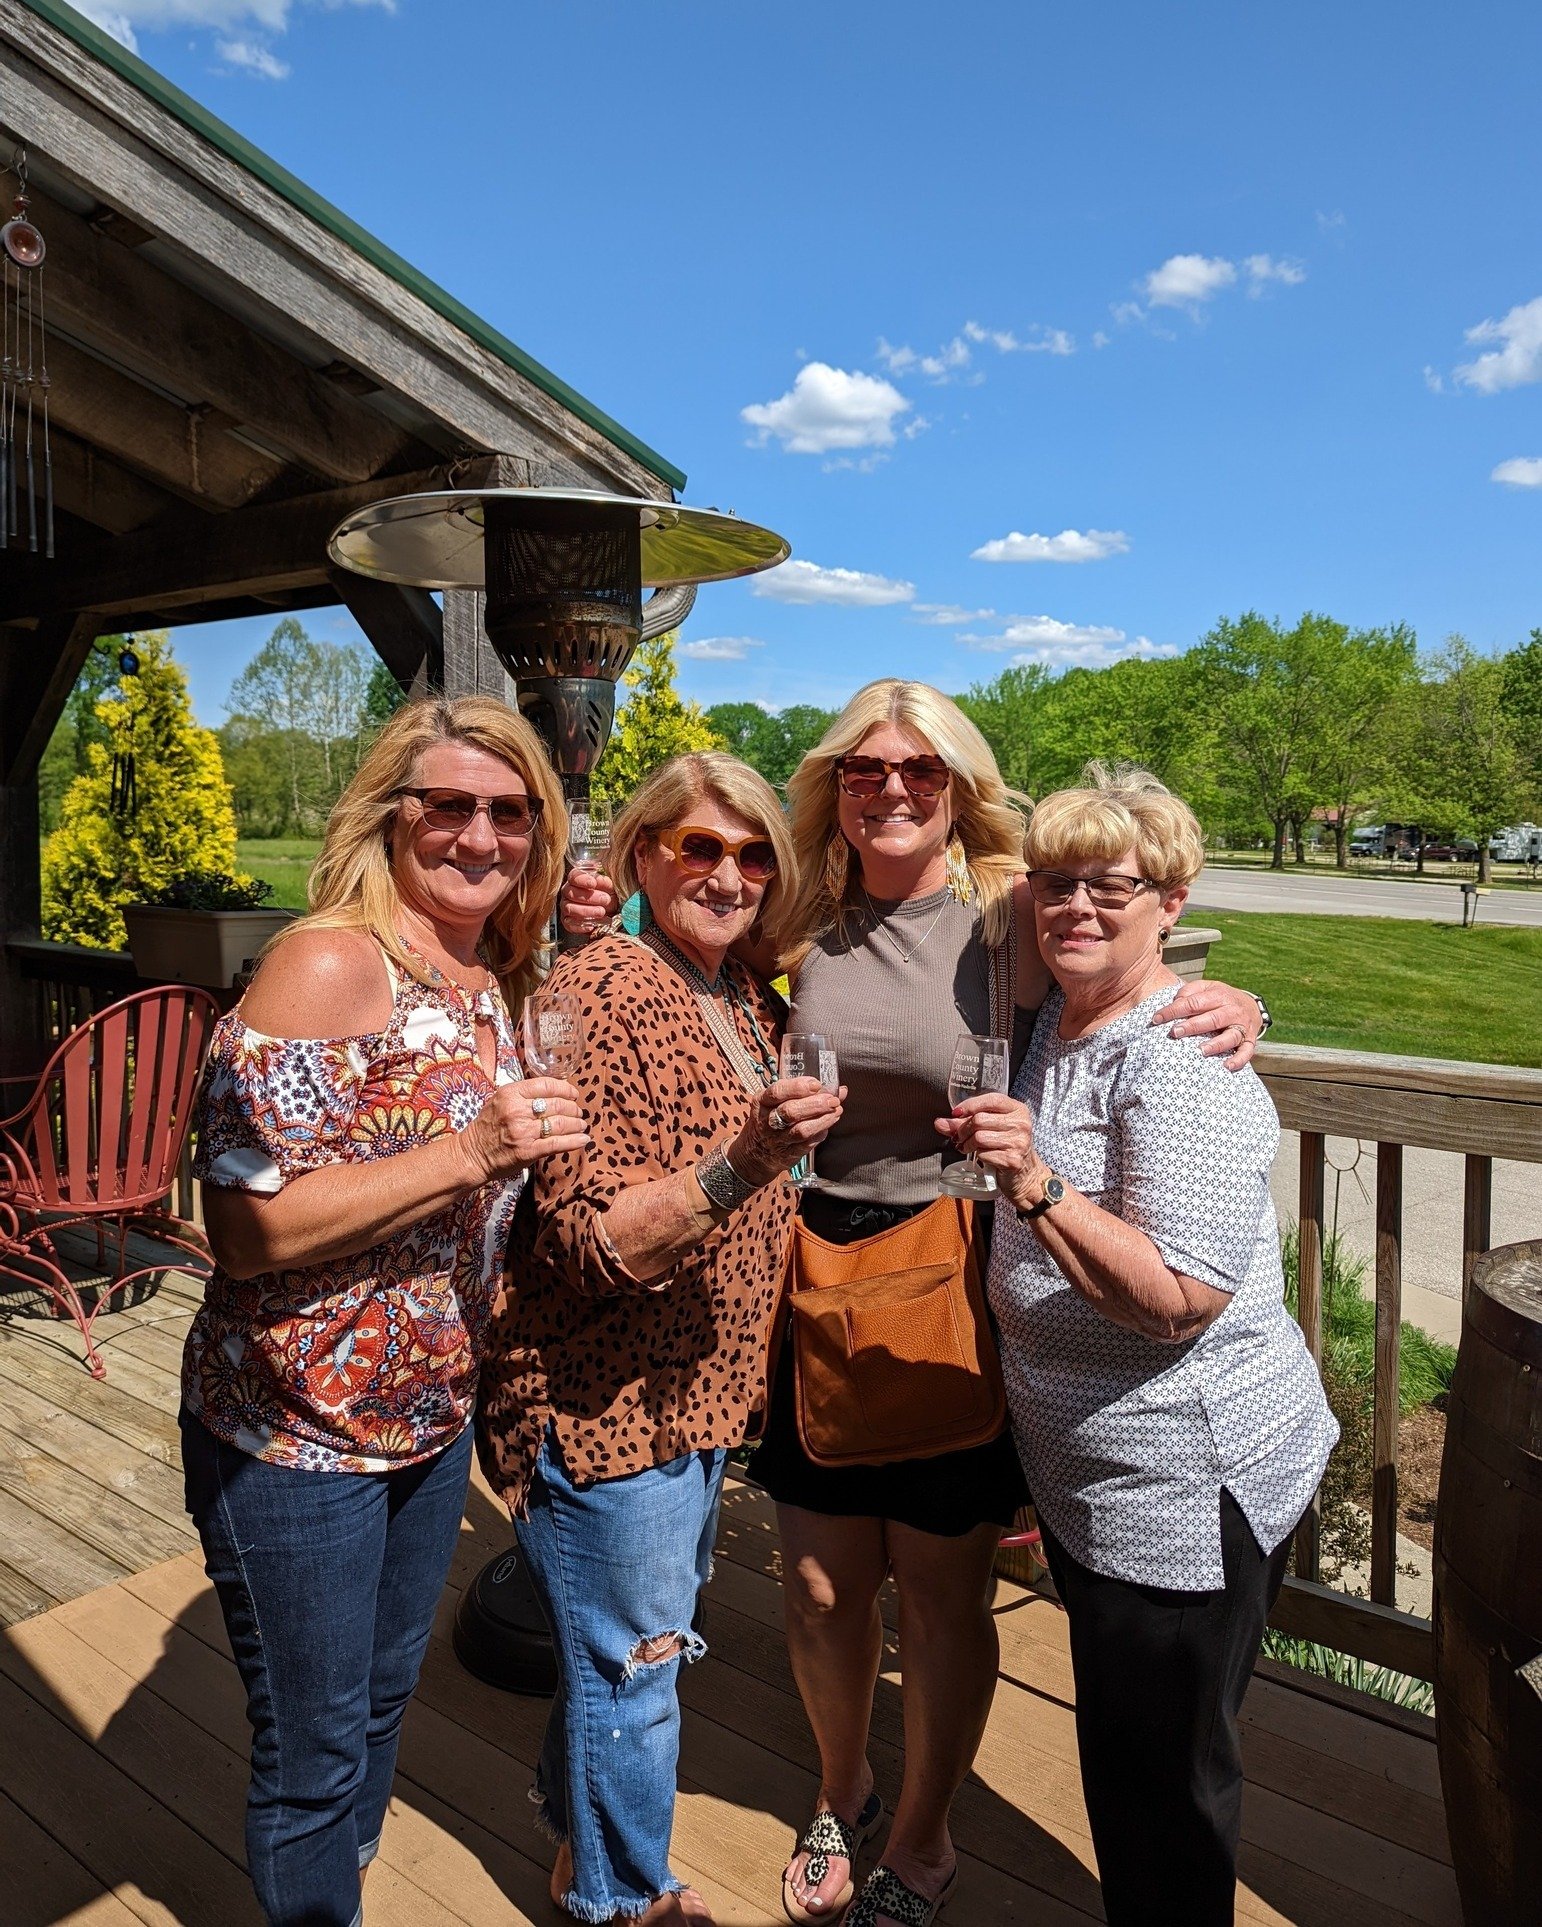 The warm weather is finally here and we have our deck open for you to enjoy it!! ☀️🍷

Come see us at our Winery in Gnaw Bone for a complimentary tasting to help you choose a glass or bottle of your favorite Brown County wine to enjoy outside!  We al